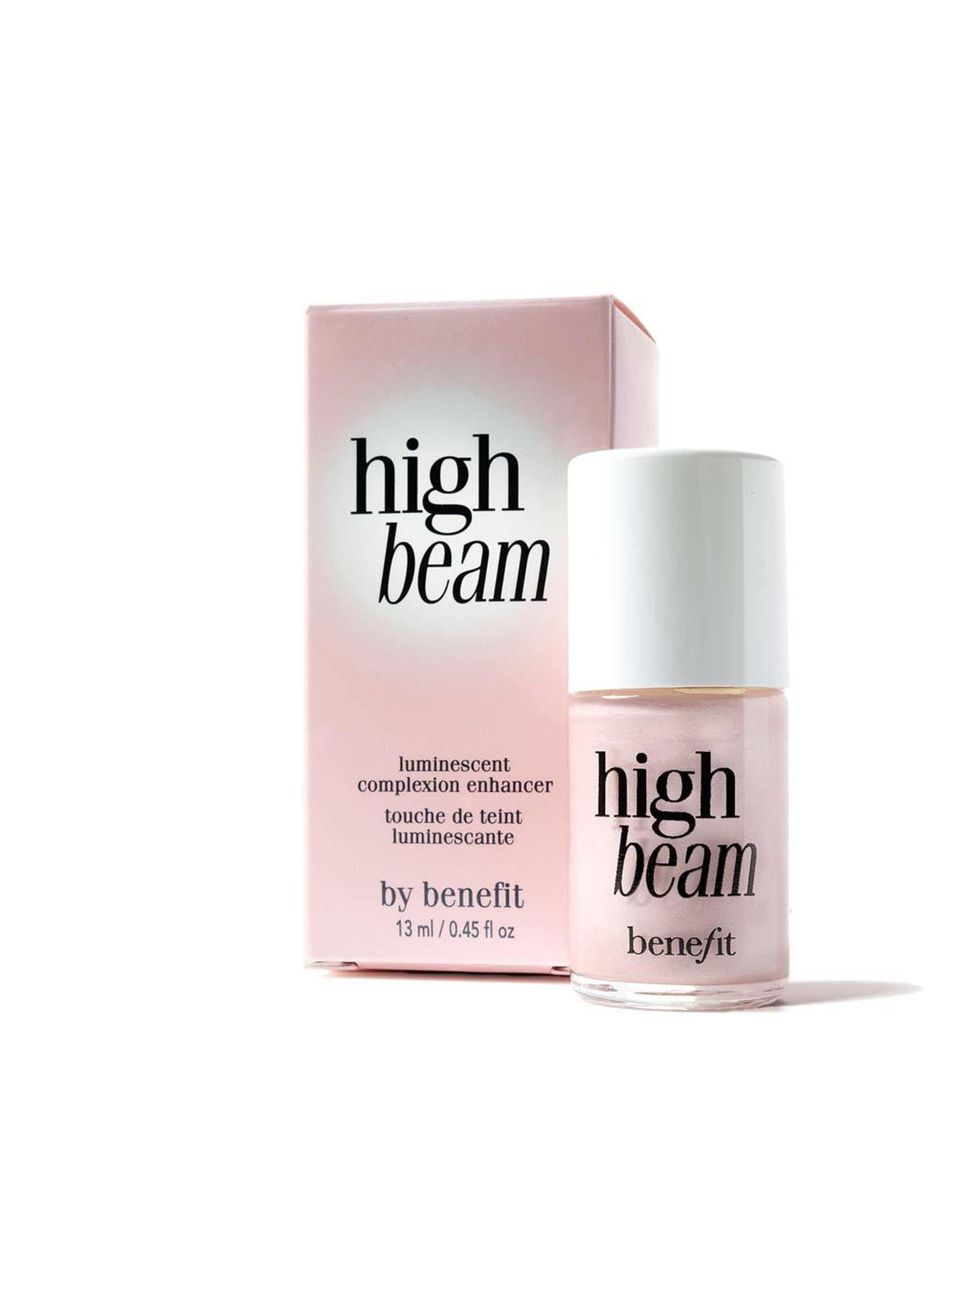 <p><a href="http://www.benefitcosmetics.co.uk/product/view/high-beam">Benefit High Beam, &pound;18.50</a></p>

<p>A cult beauty product that guarantees a light-reflecting glow. Just dab a small dot on to your cheek bones and just above your brows to perk-